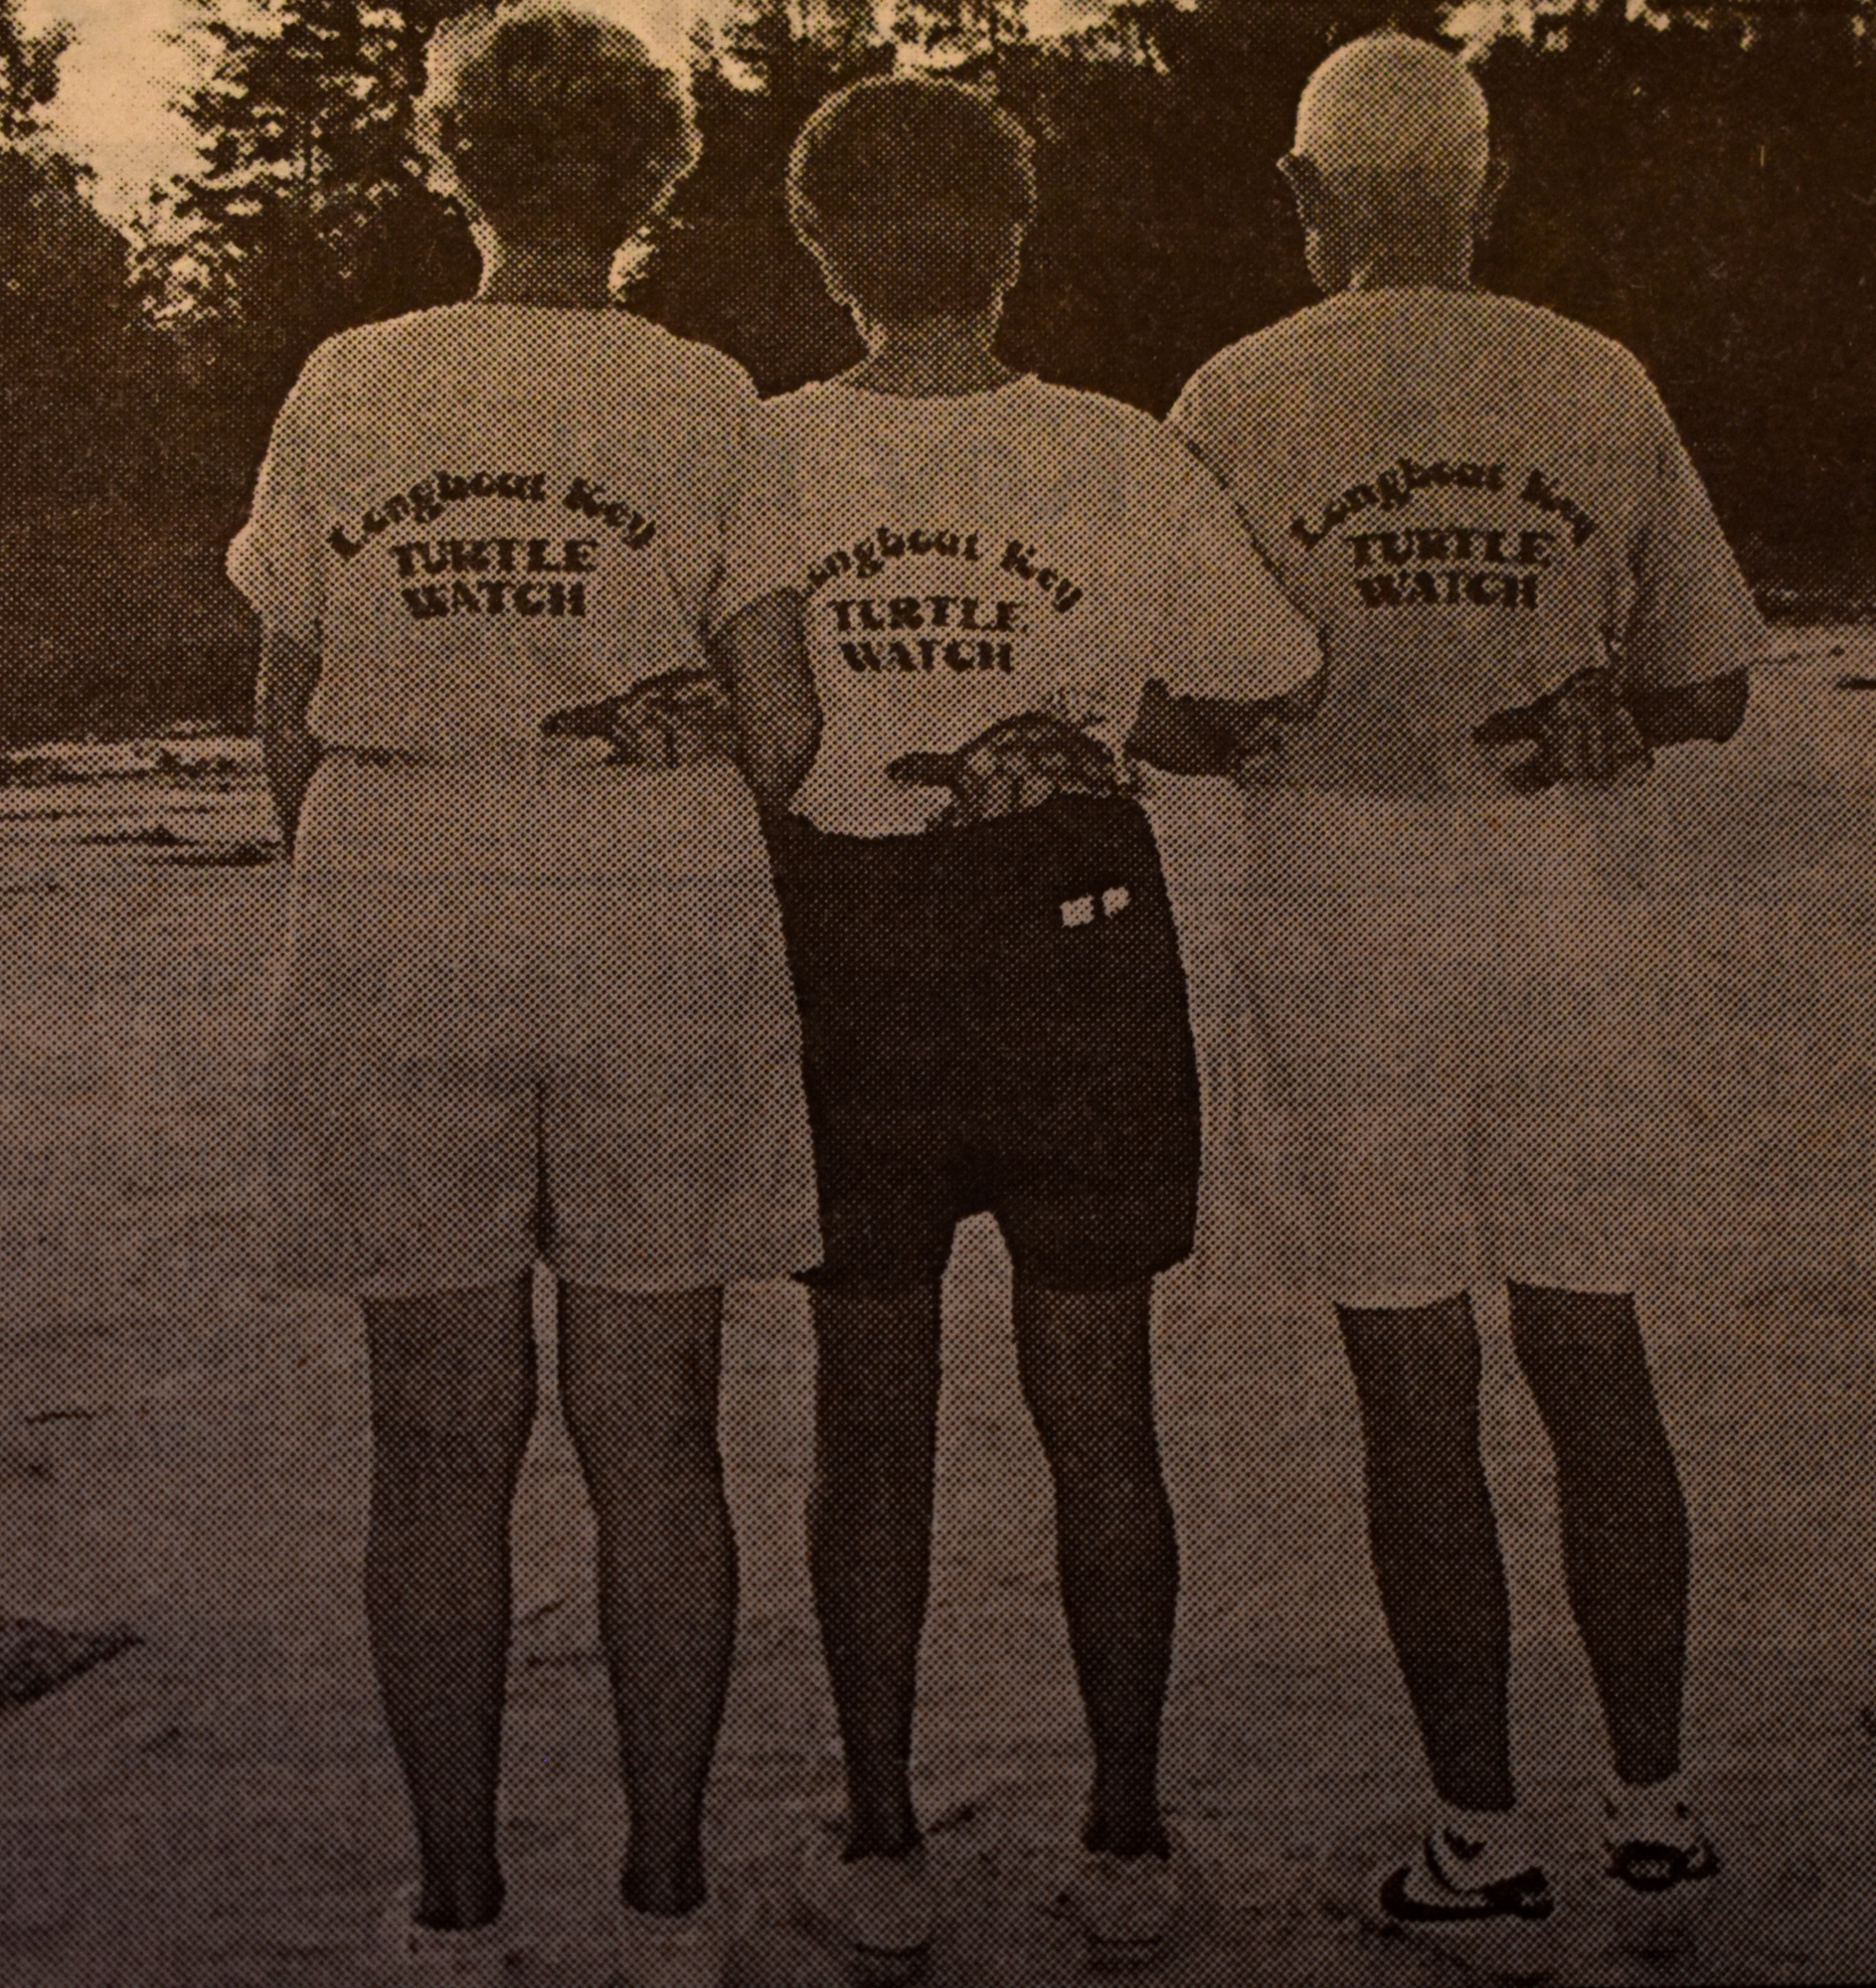 The turtle watch volunteers model shirts worn in 1995. Today, turtle enthusiasts can purchase shirts as a donation to the turtle watch.